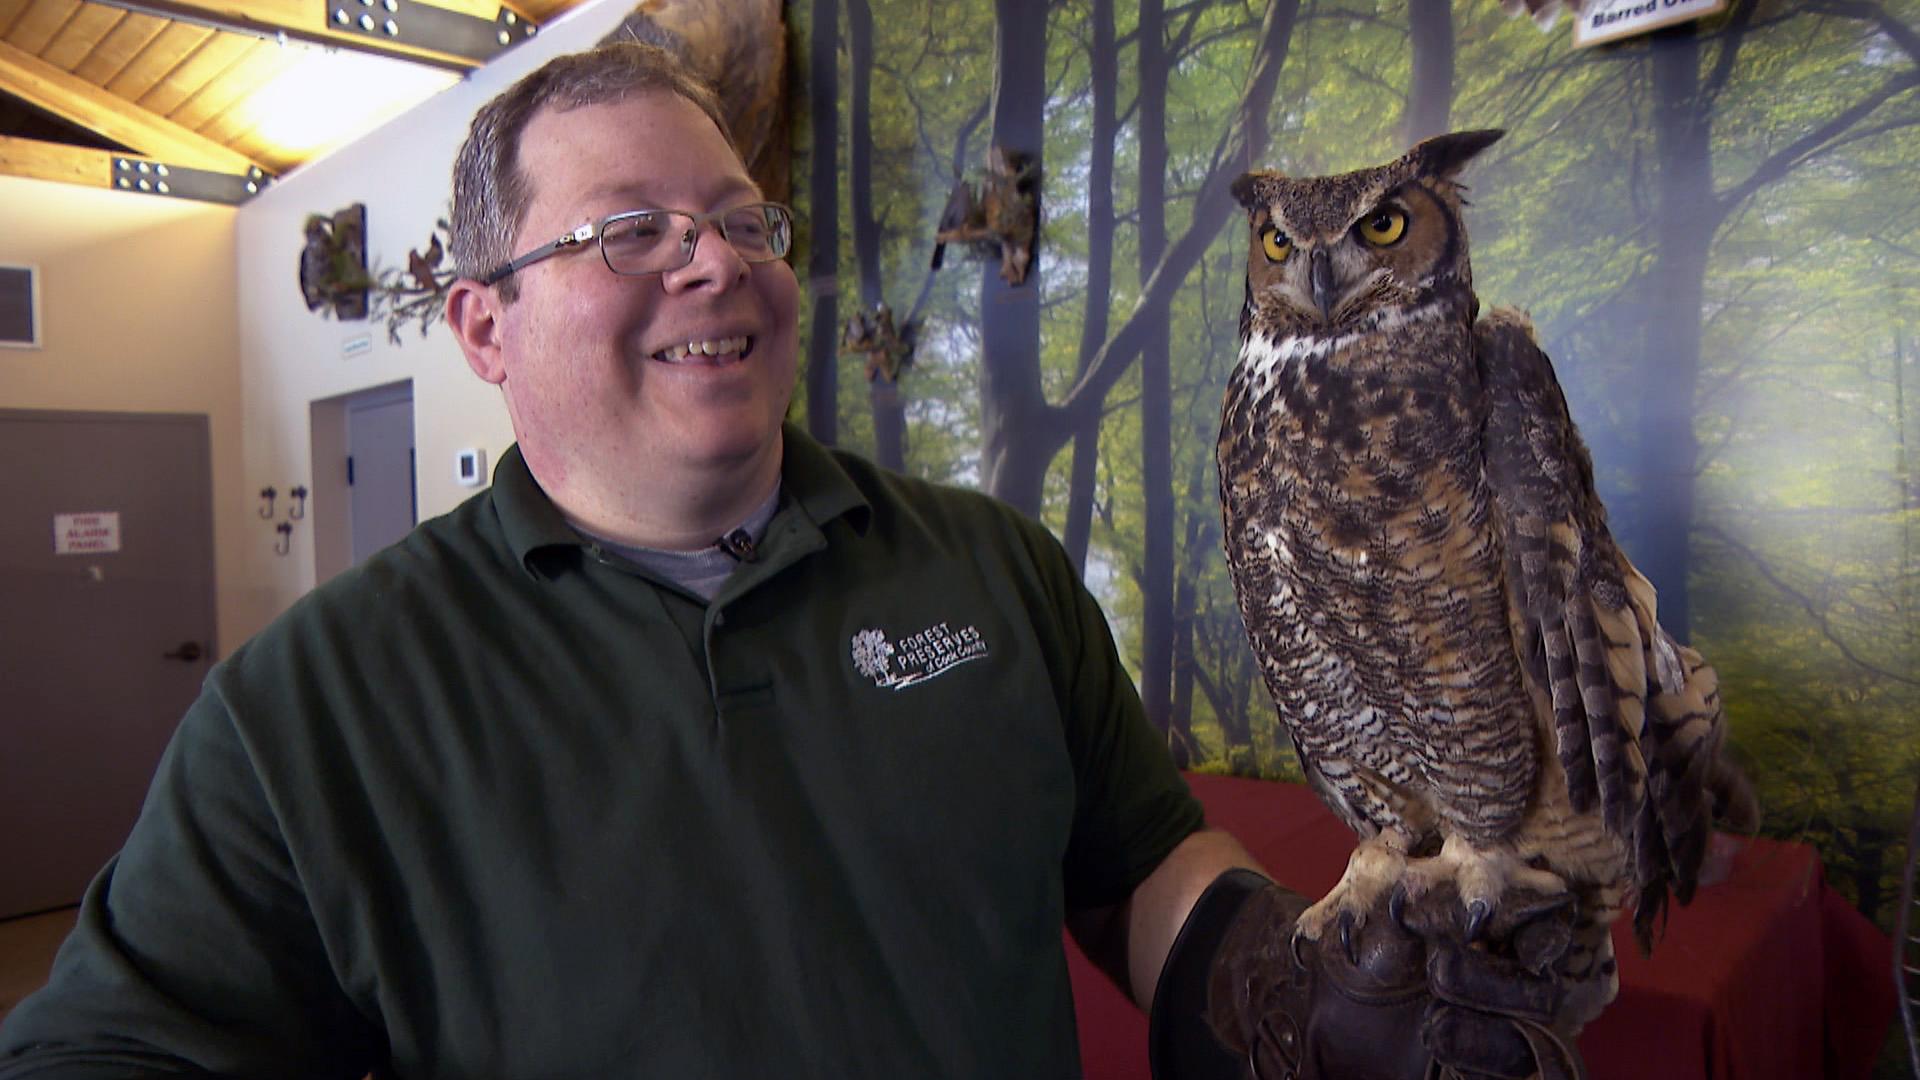 Cook County Forest Preserves naturalist Ryan DePauw holds a great horned owl, the largest owl found in the region, at the River Trail Nature Center on Feb. 18, 2021. (WTTW News)